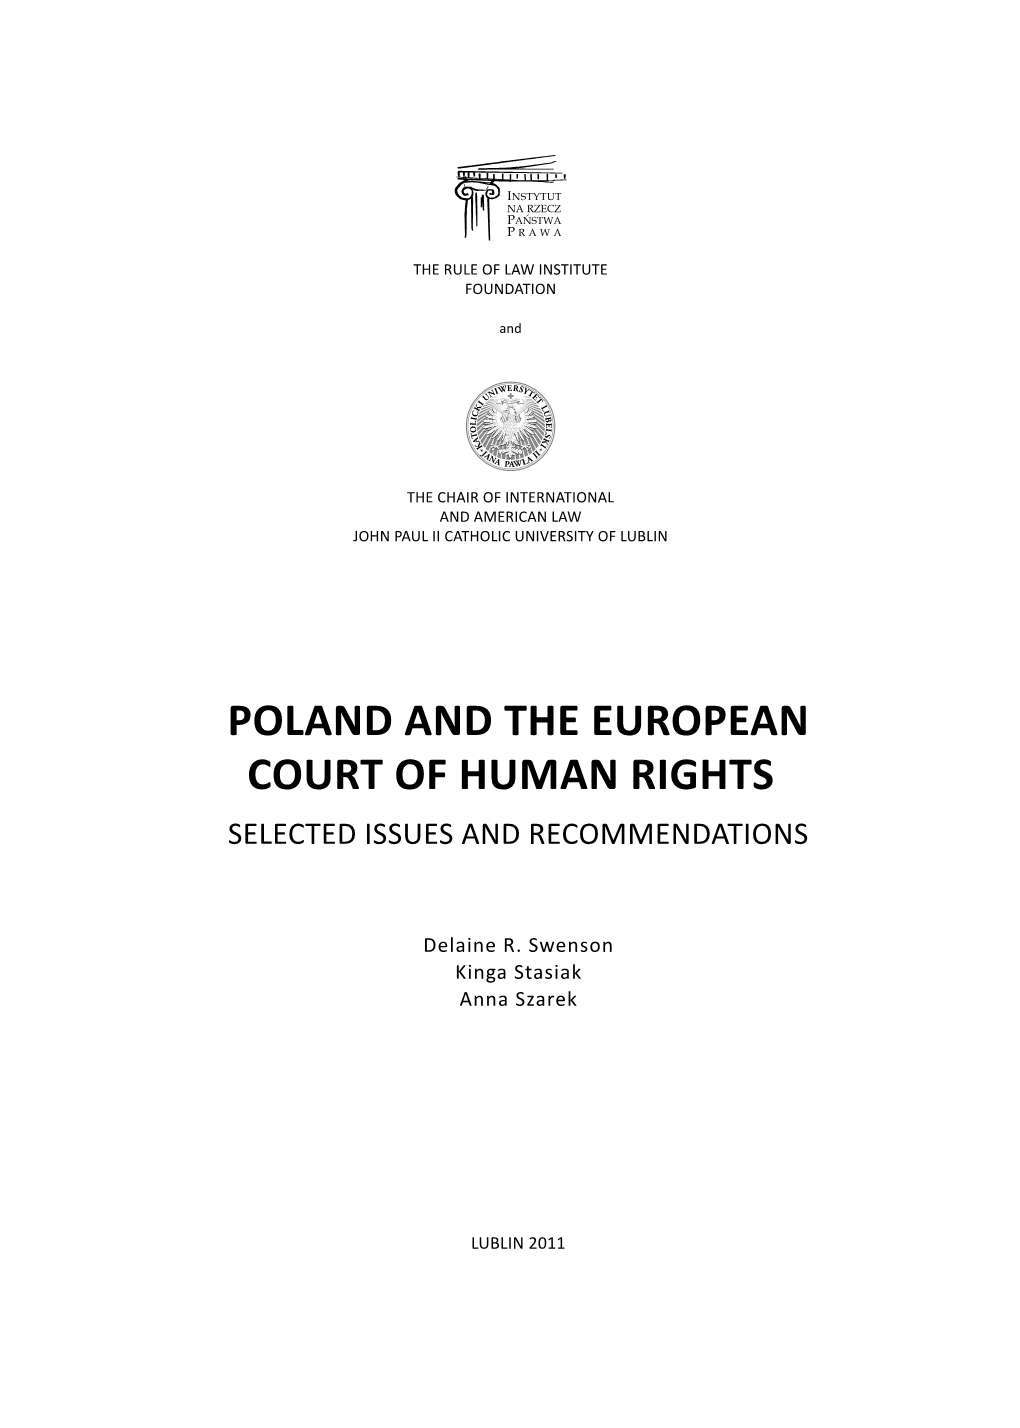 Poland and the European Court of Human Rights Selected Issues and Recommendations